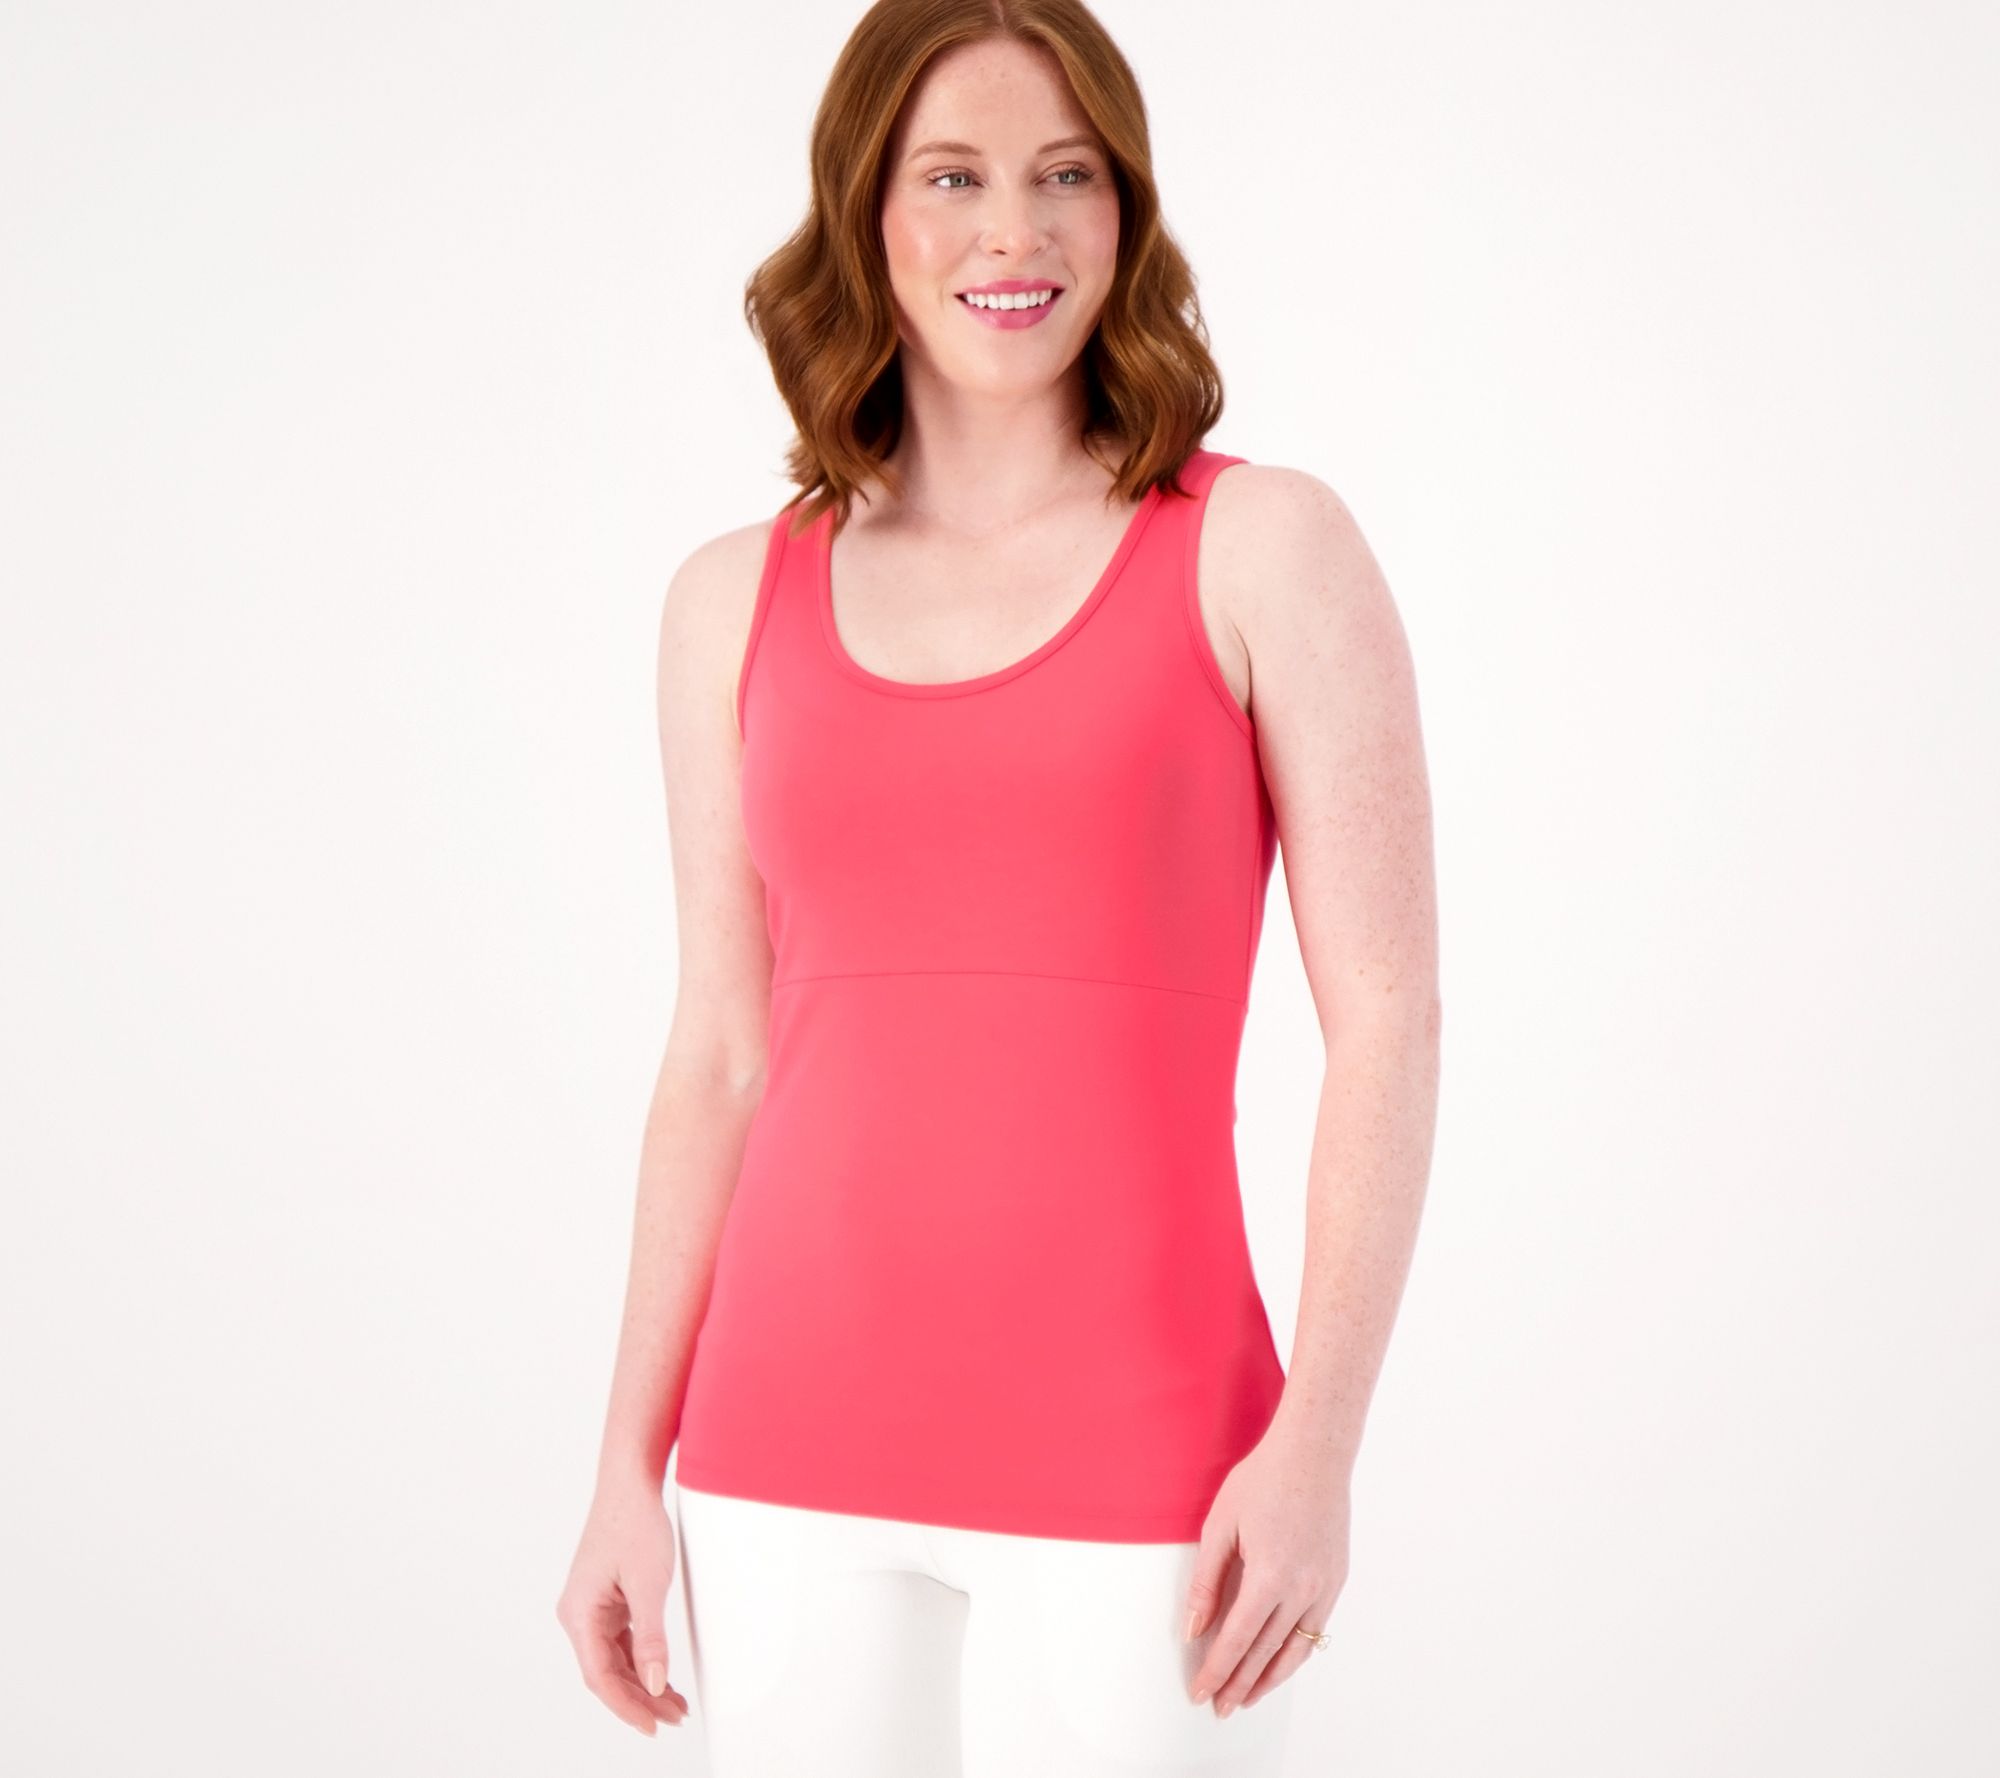 Women with Control Tummy Control Tank Top